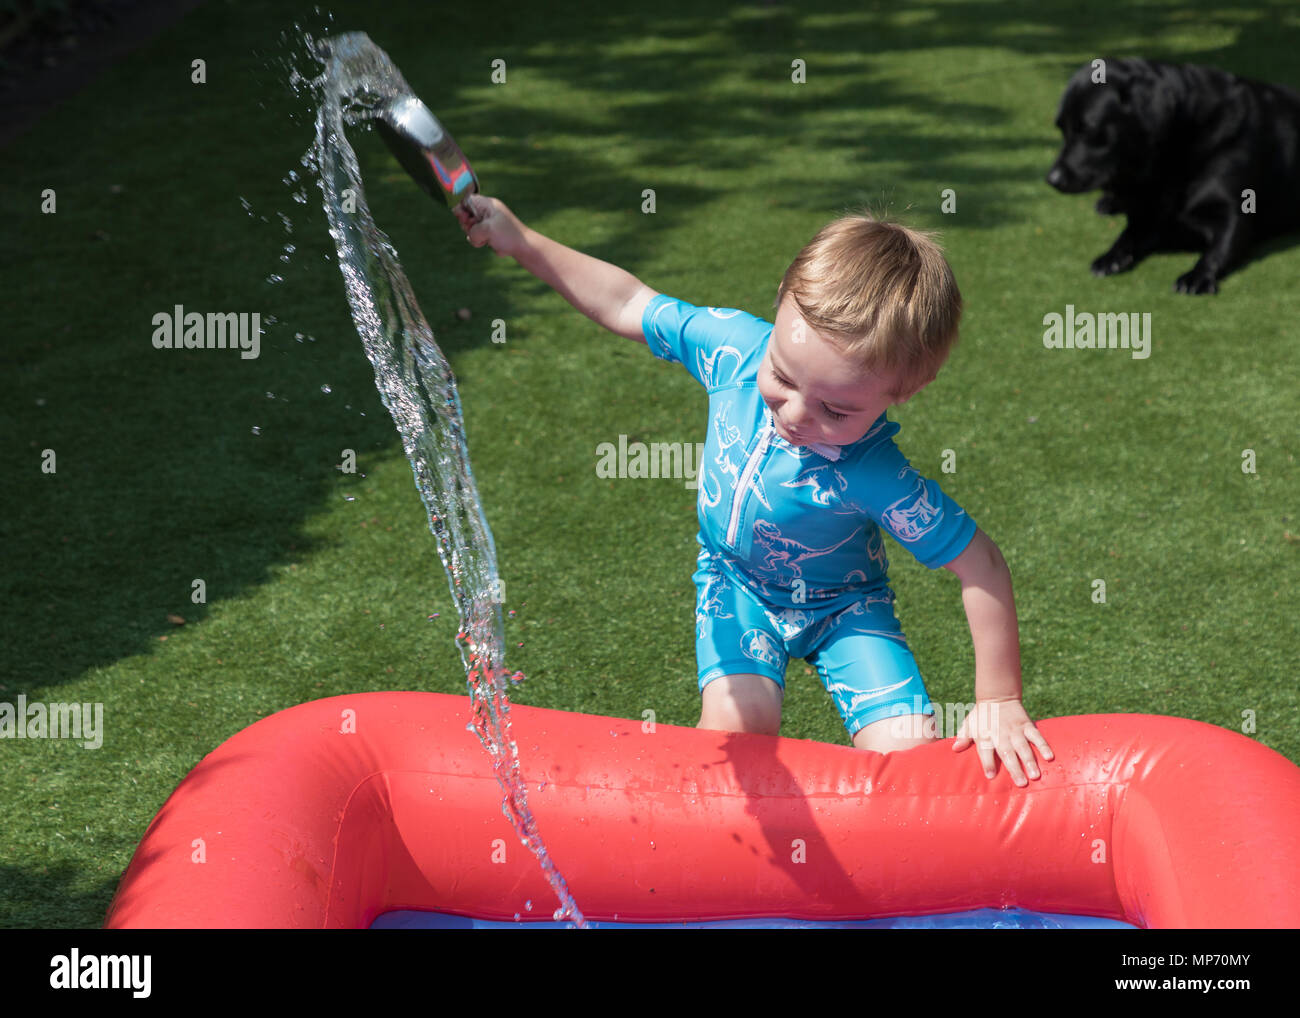 Worksop, Nottinghamshire, UK. Monday 21st May 2018. Sam Wilson, aged two, plays in a paddling pool during a heat wave in Worksop, Nottinghamshire. Credit: James Wilson/Alamy Live News Stock Photo